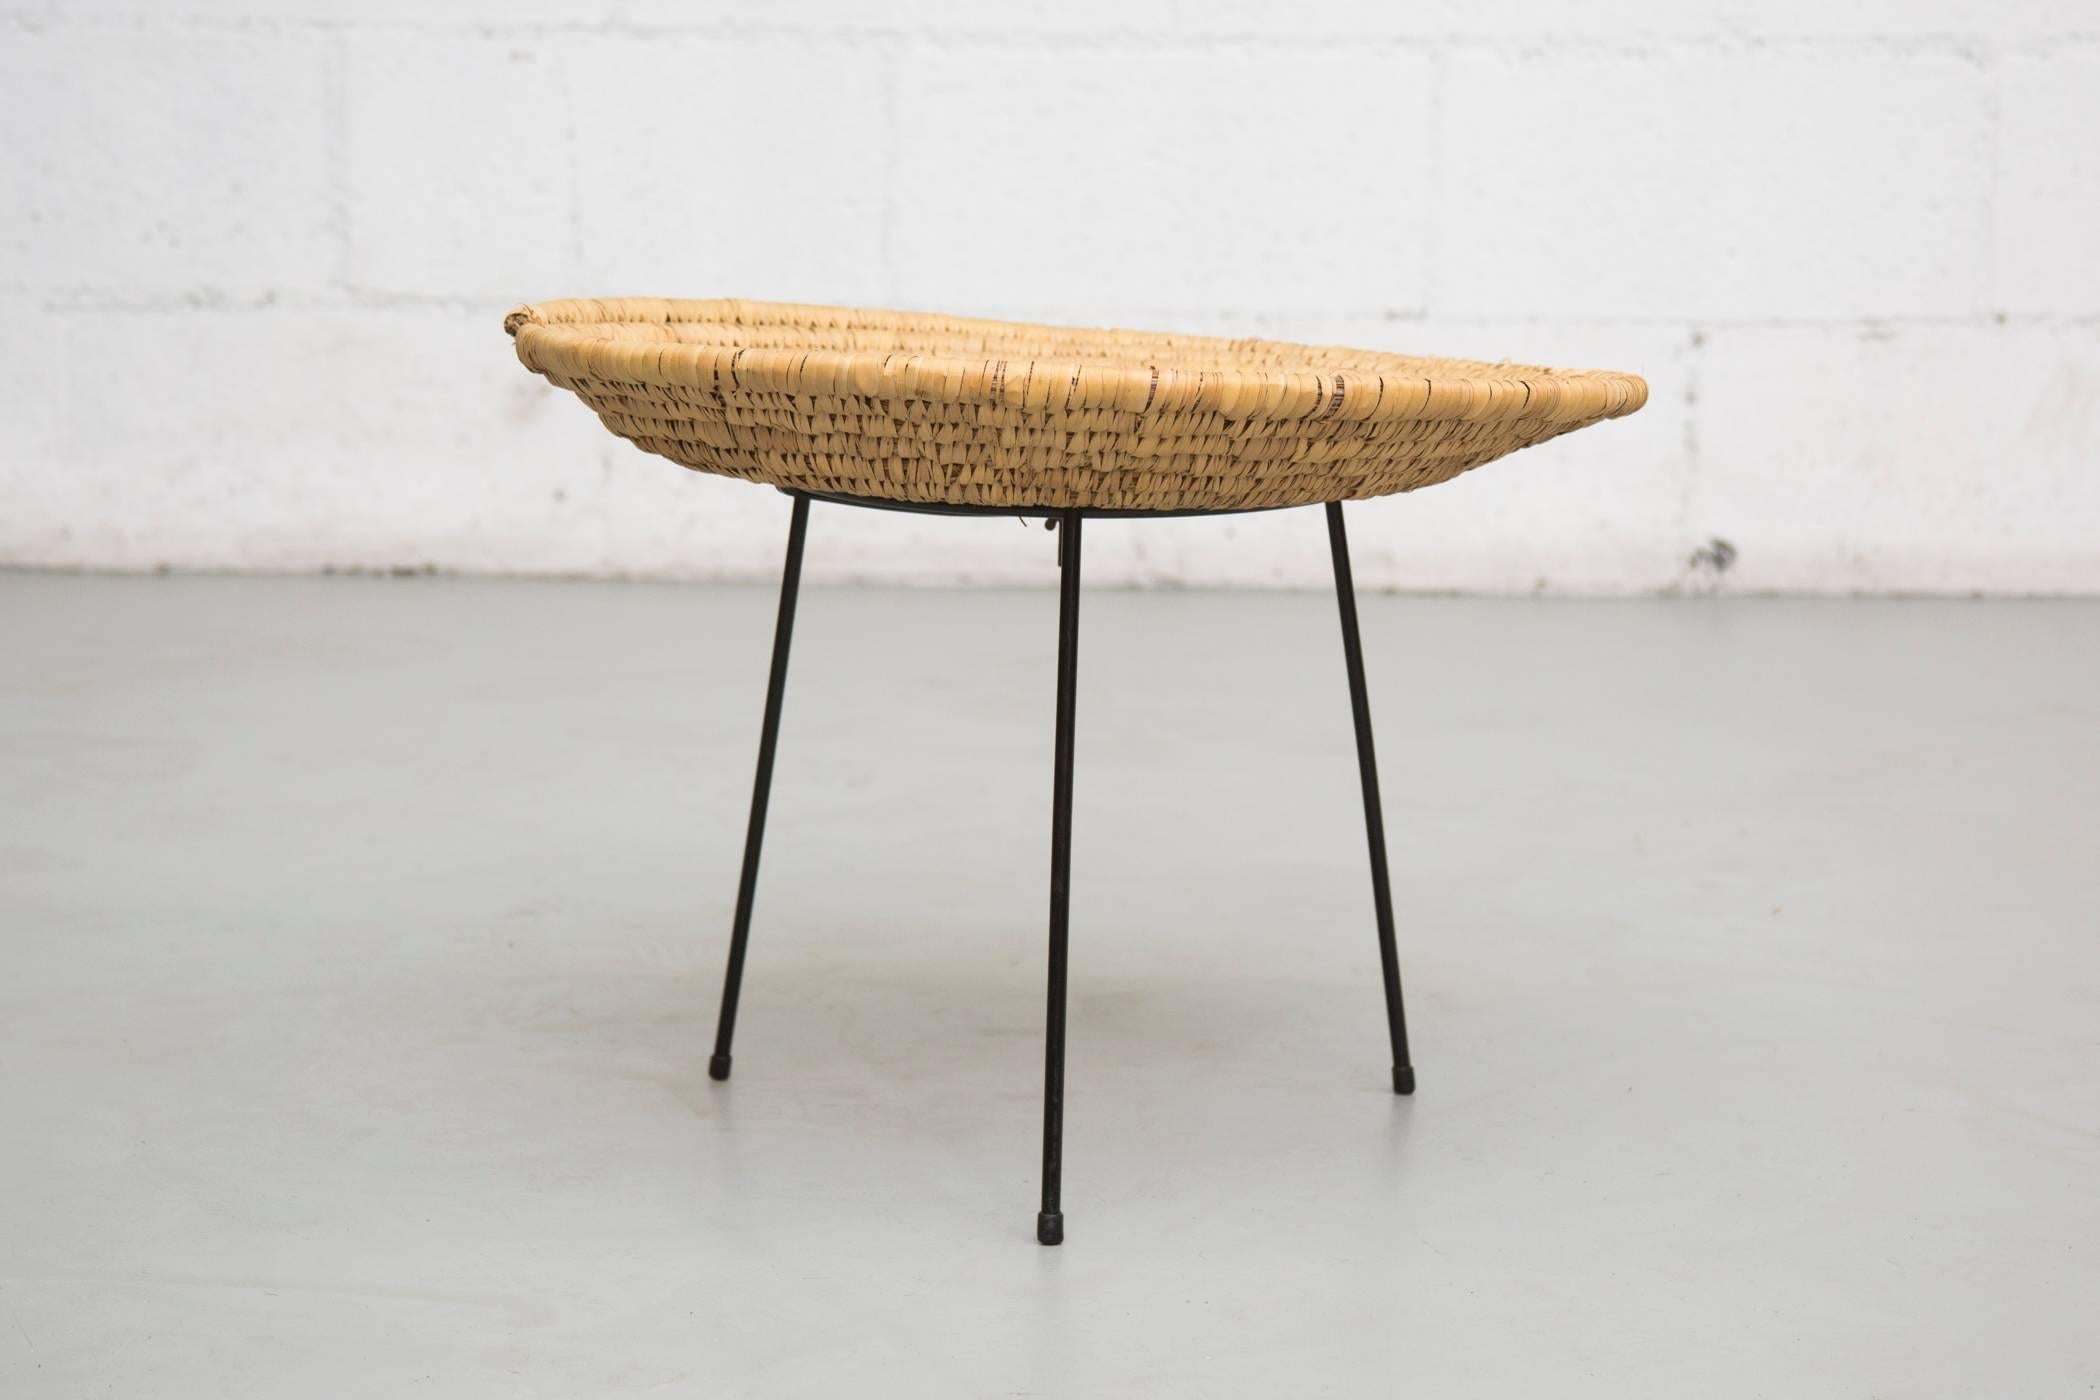 Woven rush side table, tray-basket bolted on a black enameled wire frame. In original condition with slight slumping and some wear to the frame consistent with age and use.